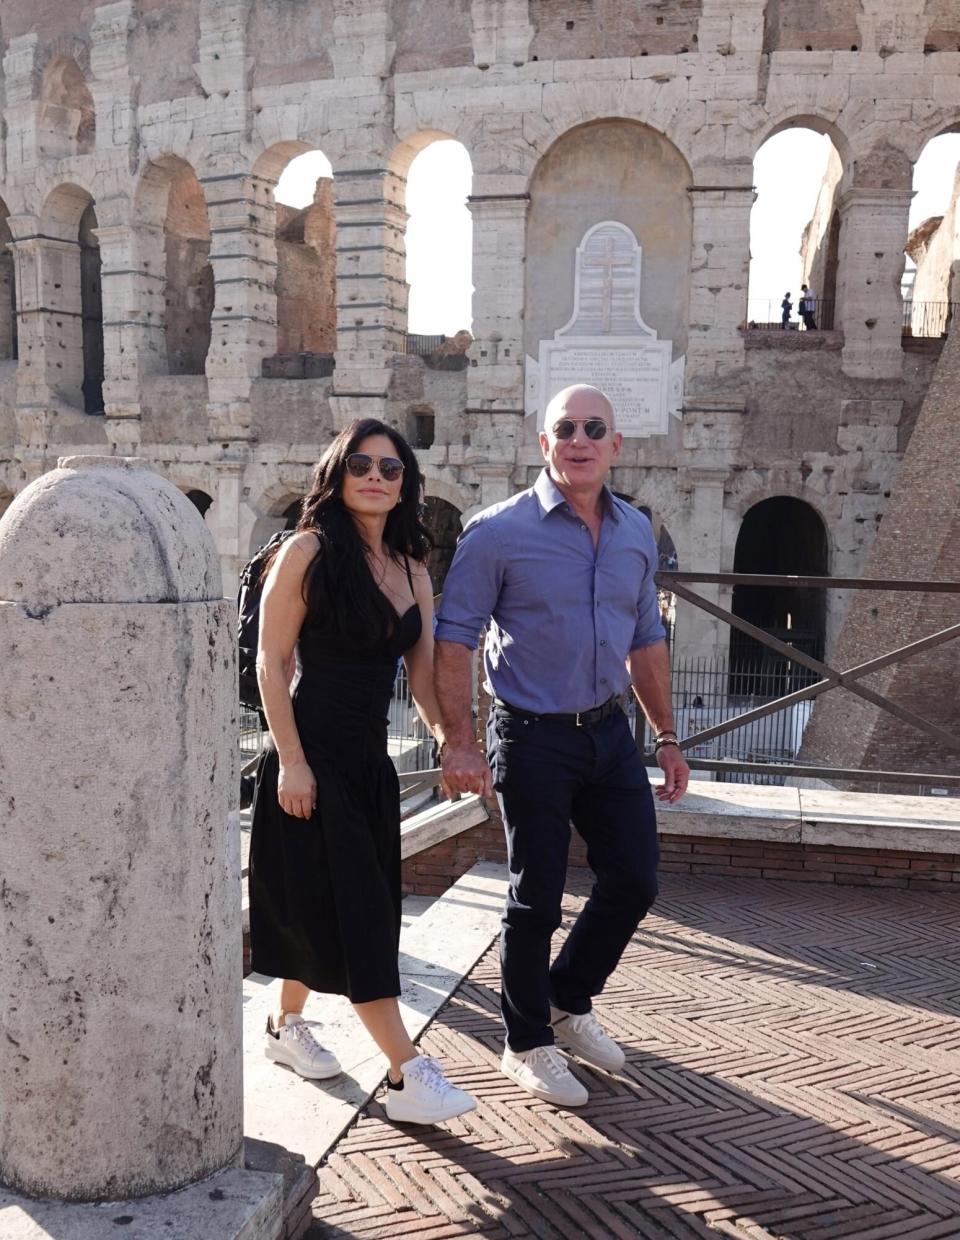 Rome, ITALY - Billionaire Jeff Bezos and Lauren Sanchez walk hand in hand while visiting the Colosseum in Rome. Later the happy couple lunched at The Court restaurant terrace in front of the Colosseum. Pictured: Jeff Bezos, Lauren Sanchez BACKGRID USA 15 OCTOBER 2022 BYLINE MUST READ: Cobra Team / BACKGRID USA: +1 310 798 9111 / usasales@backgrid.com UK: +44 208 344 2007 / uksales@backgrid.com *UK Clients - Pictures Containing Children Please Pixelate Face Prior To Publication*